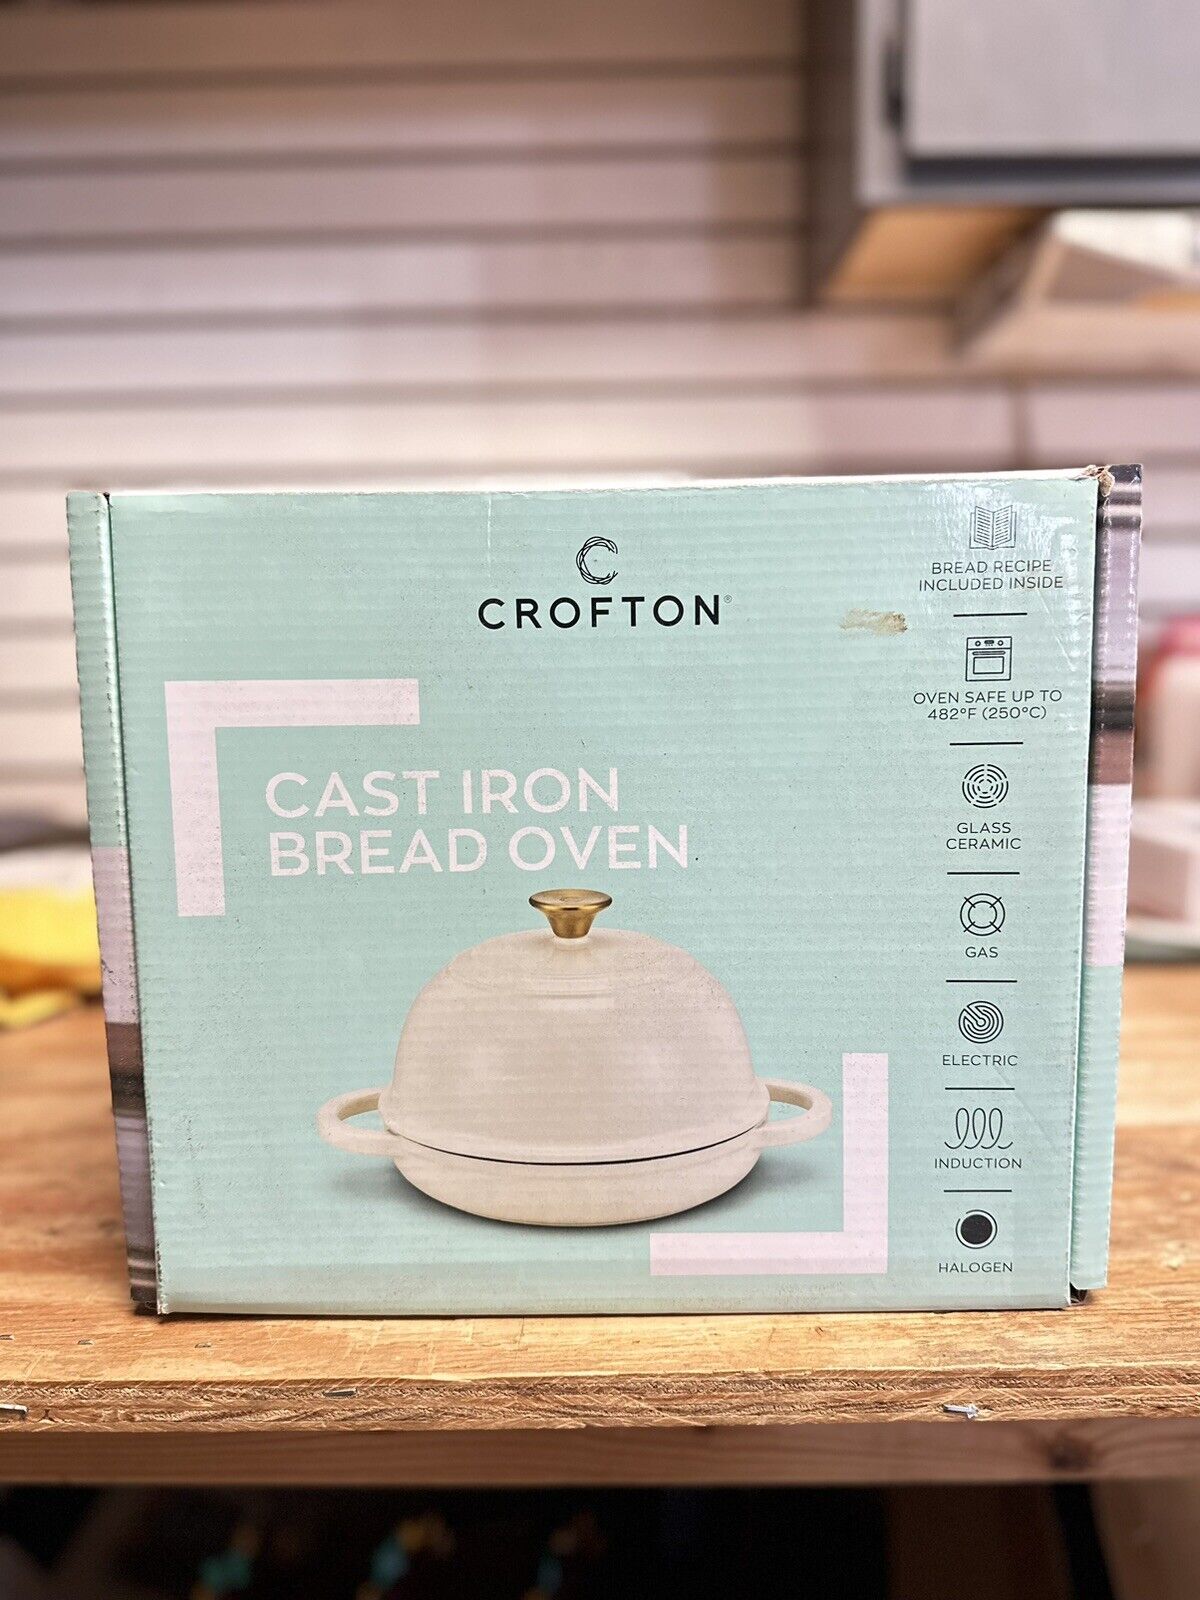 Crofton Cast Iron Bread Oven 9” Enameled Aldi New Limited Edition White Sealed